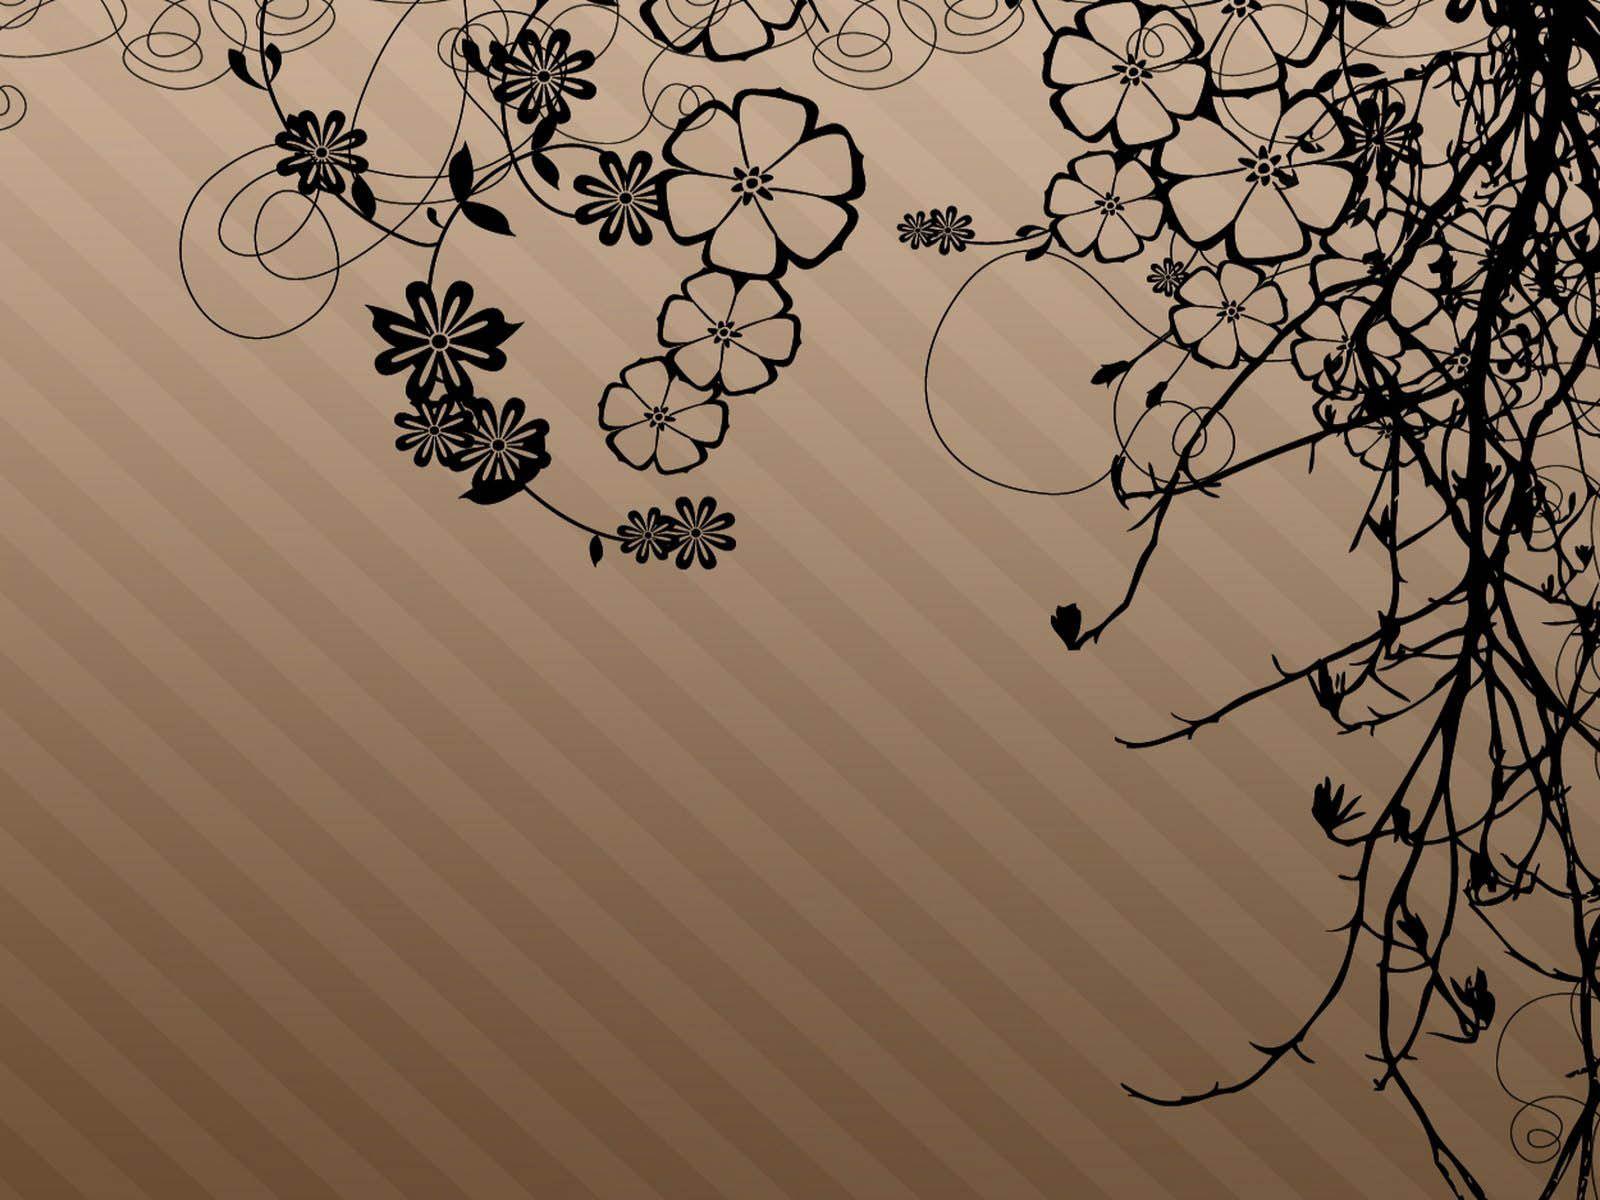 Flowers and Aesthetic Brown Background Graphic by povridestudio